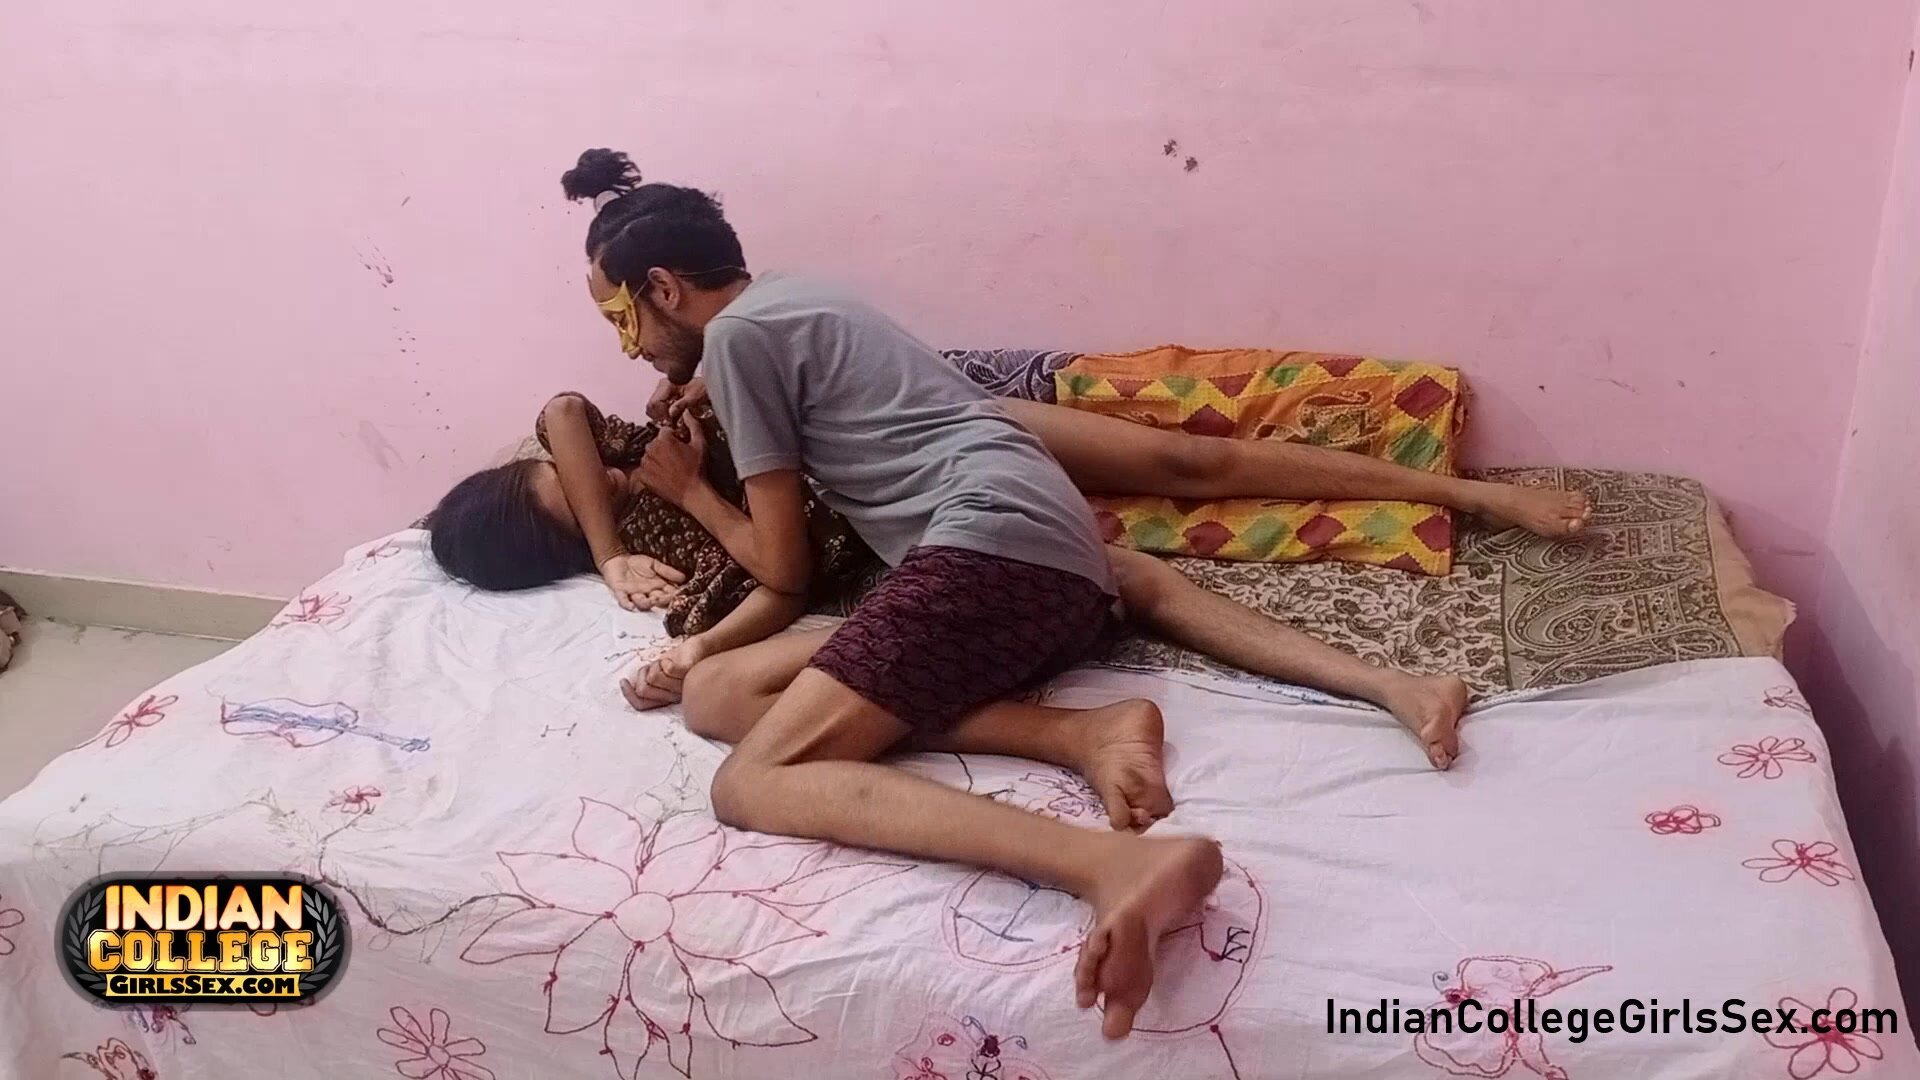 Amateur Indian skinny teen get an anal creampie after a hard desi pussy fucking sex at Fapnado